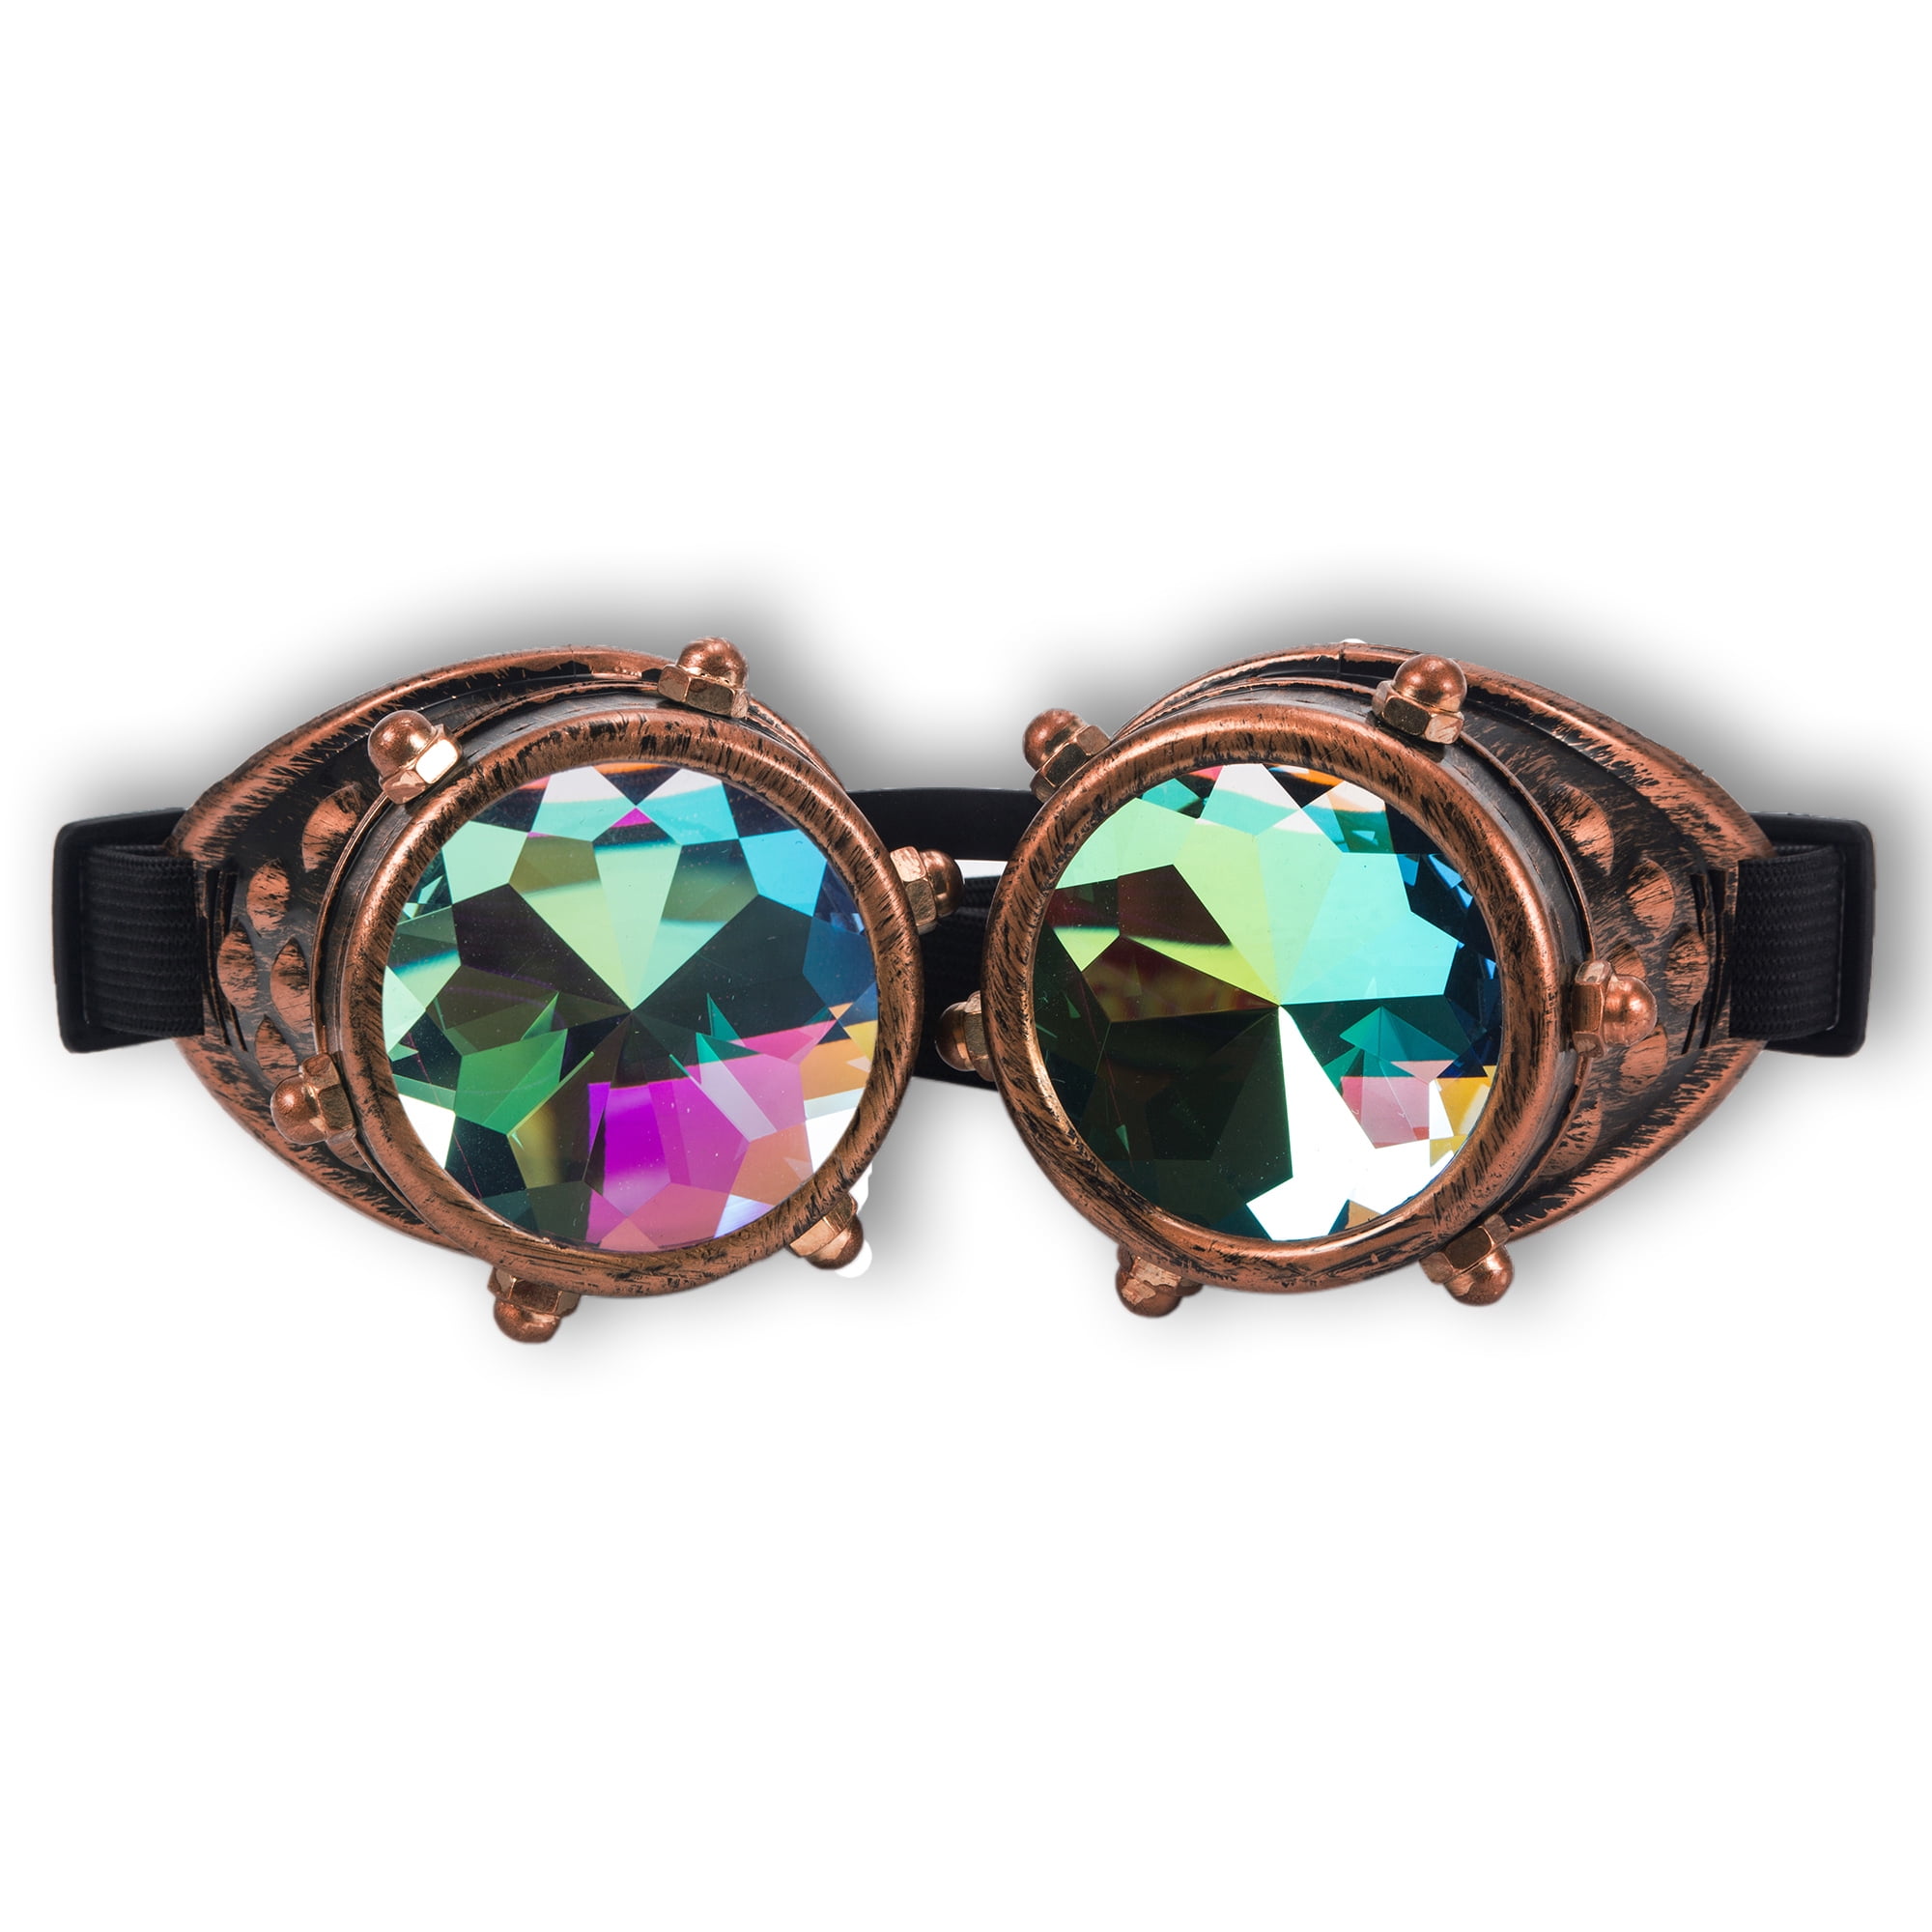 Cfgoggle Vintage Steampunk Goggles Rainbow Kaleidoscope Festival Diffraction Goggles Cosplay 